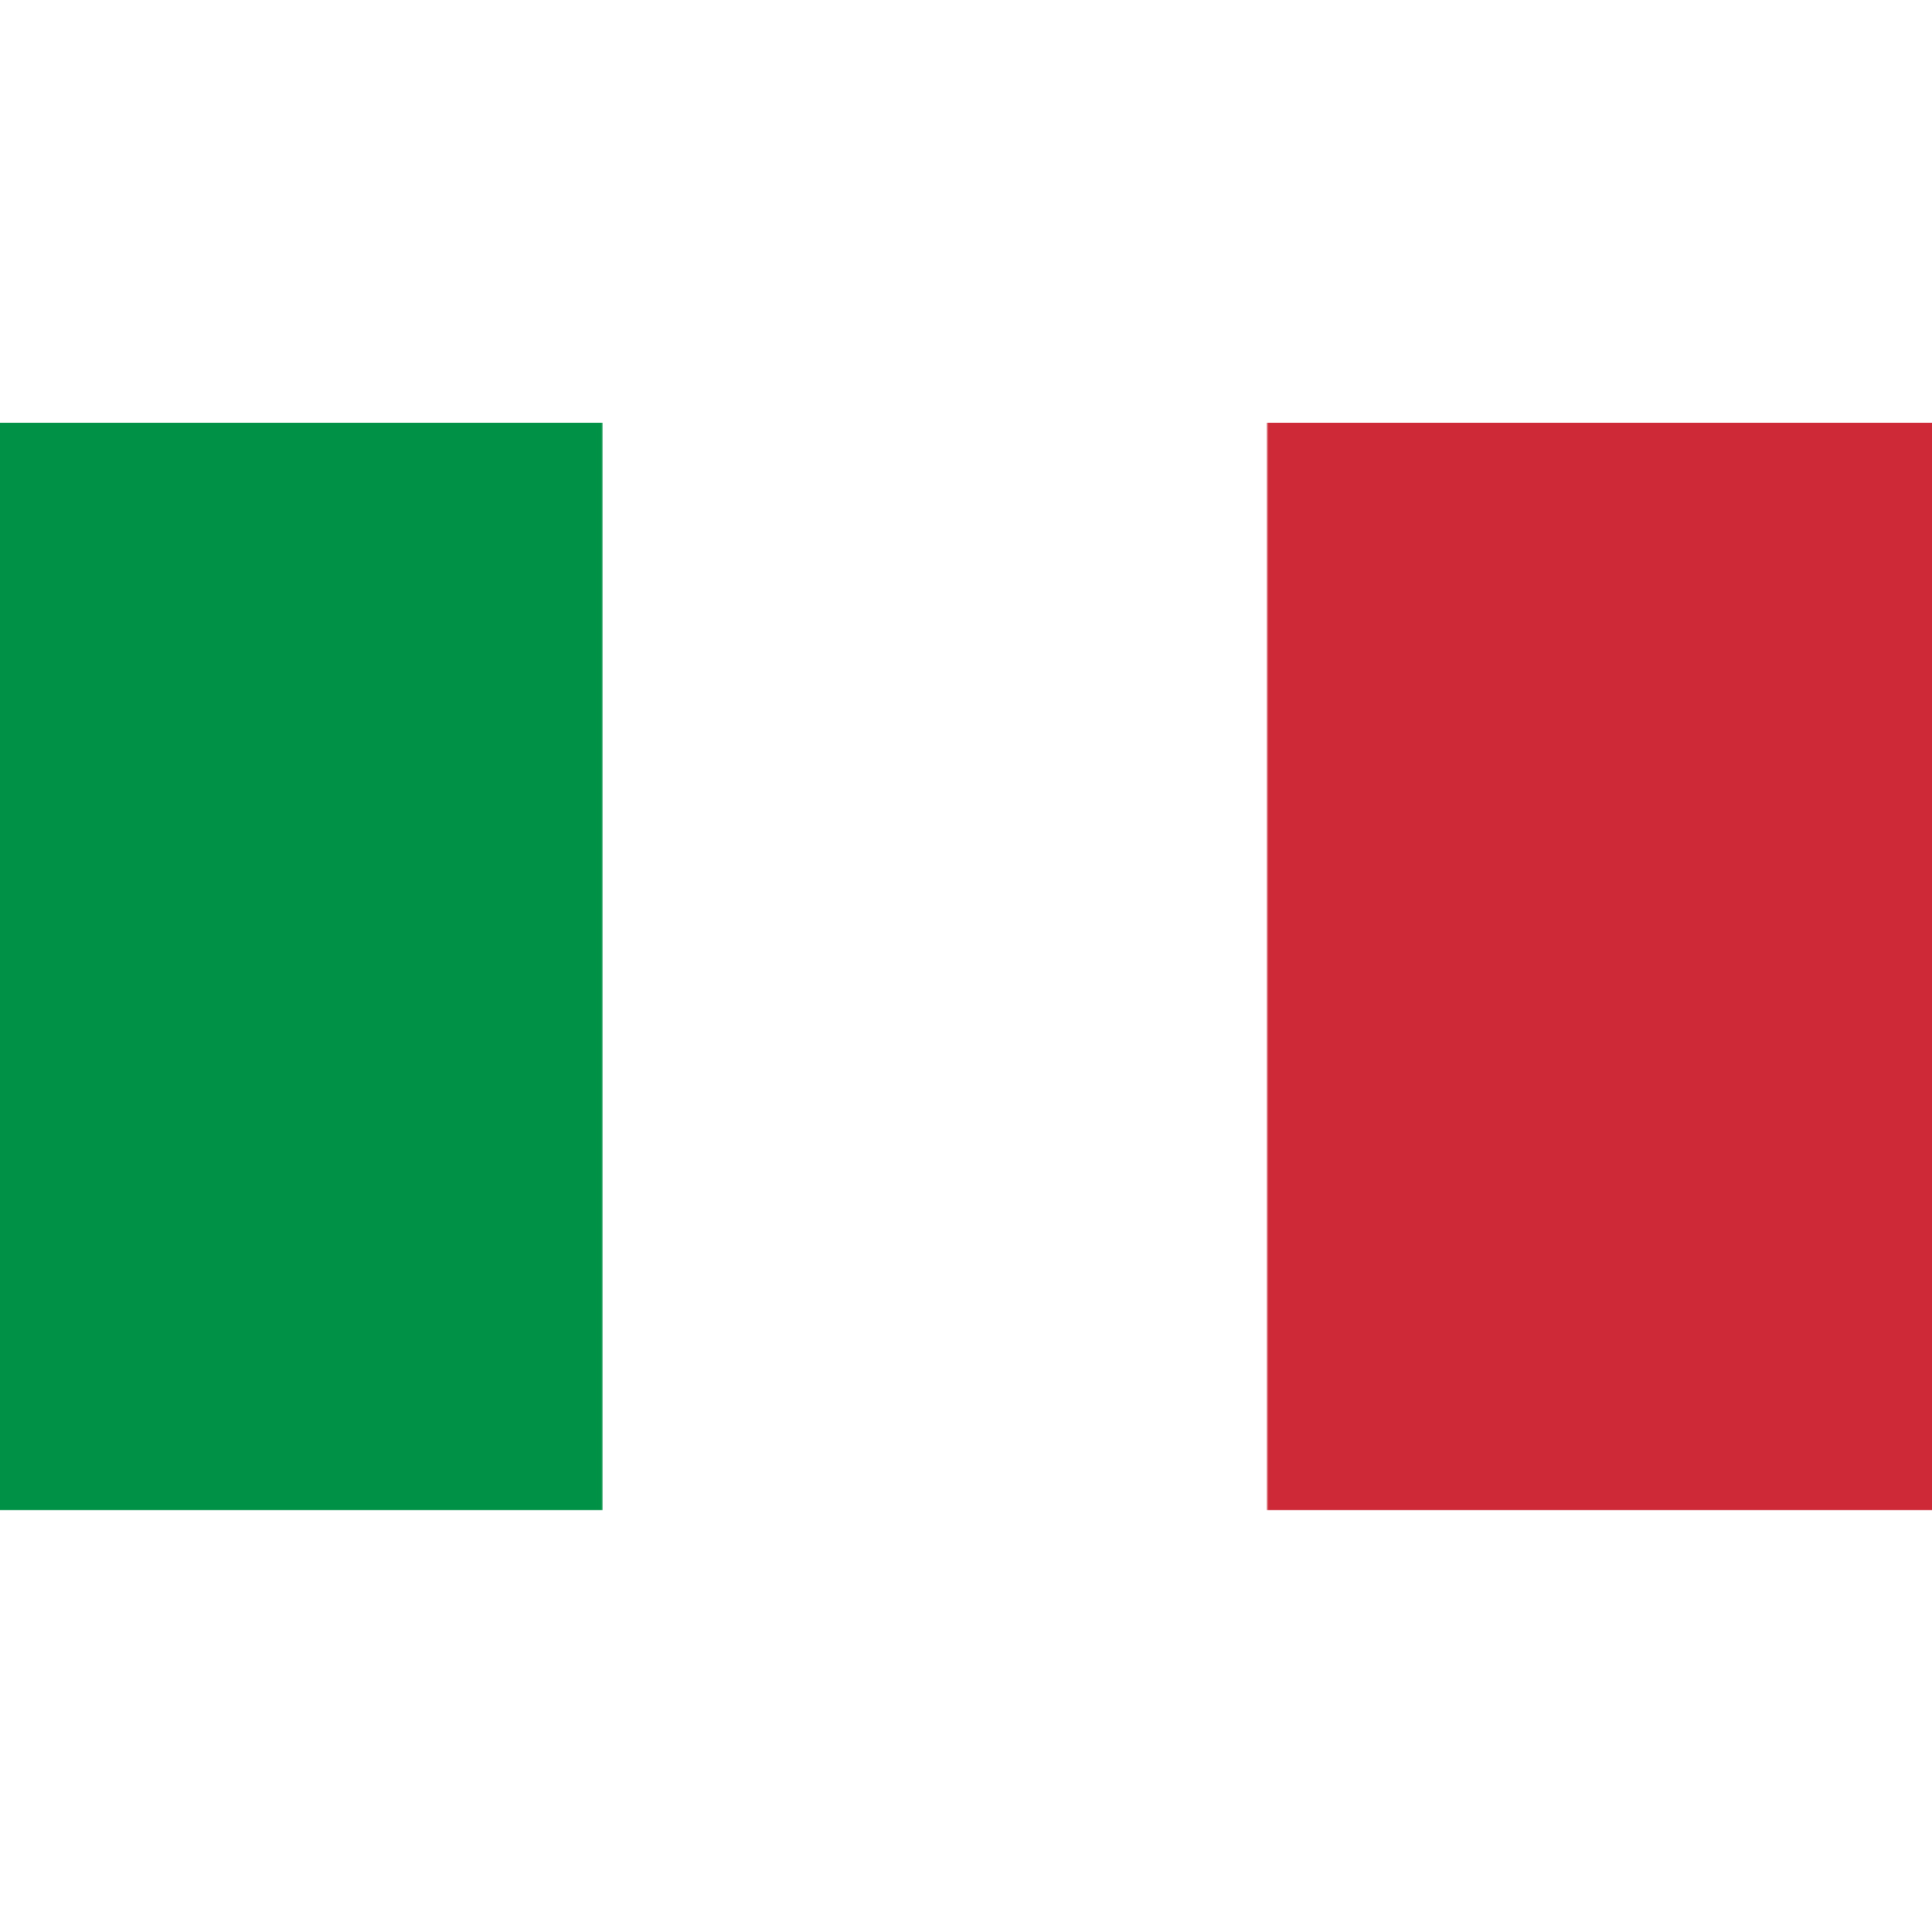 The flag of Italy consists of three equally sized vertical bands in green, white and red.